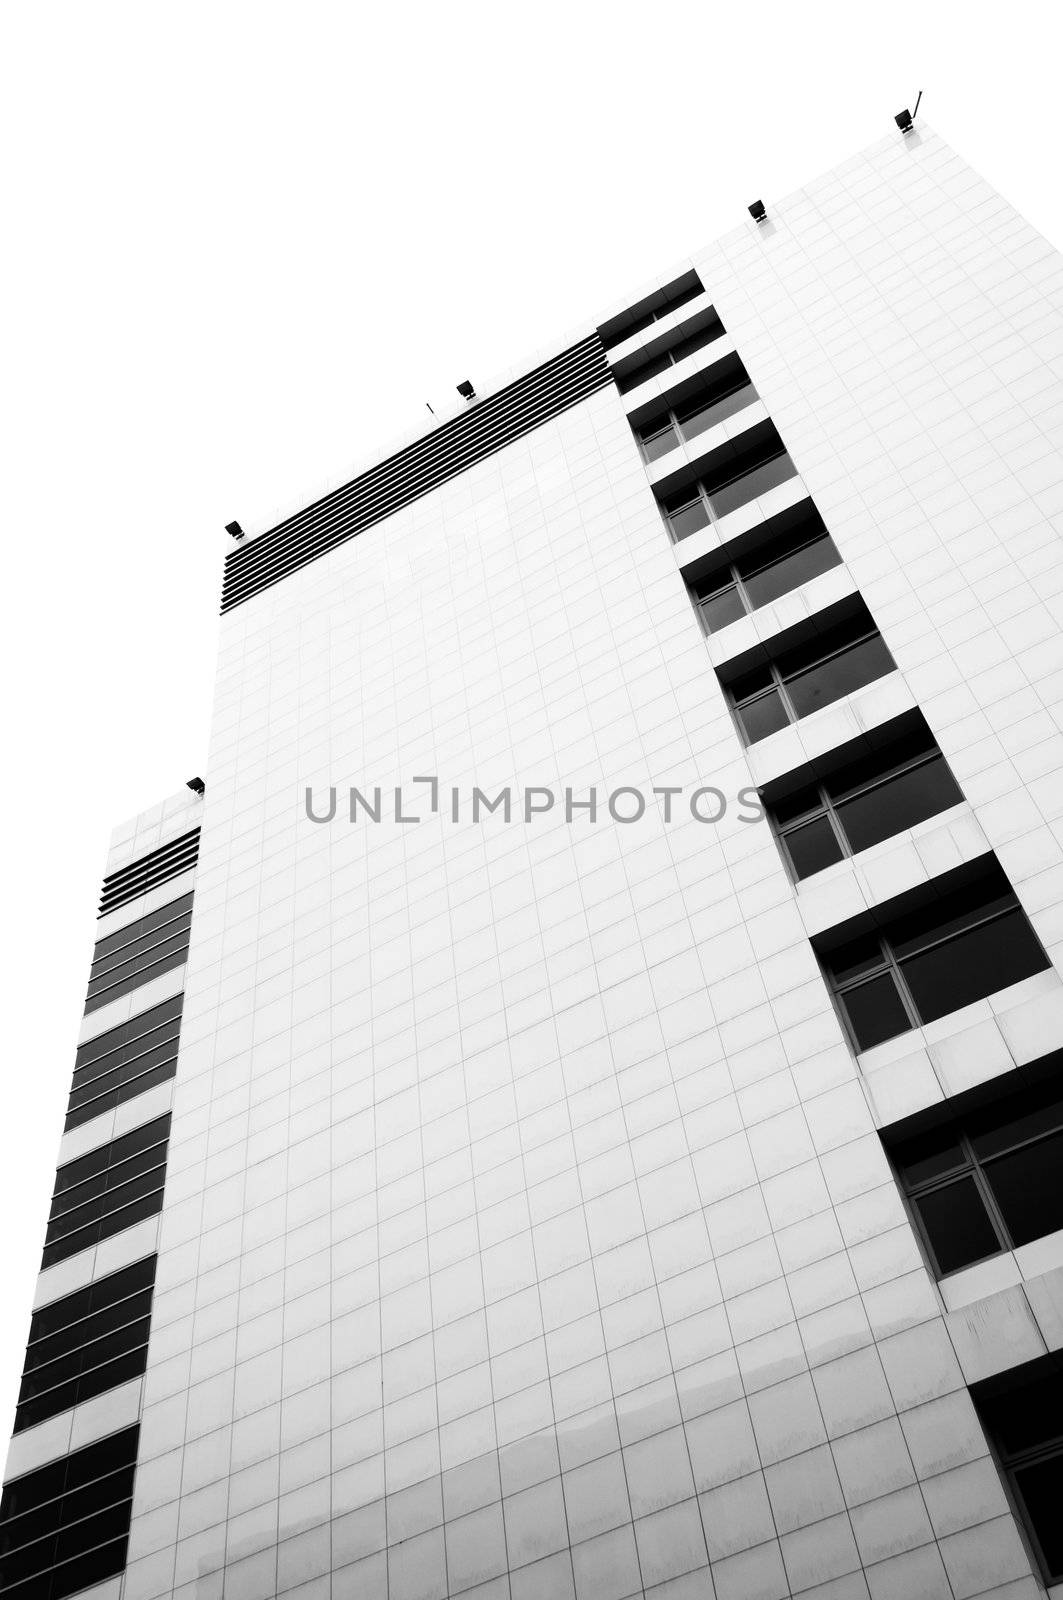 Abstract black and white infrared photography of modern architecture.